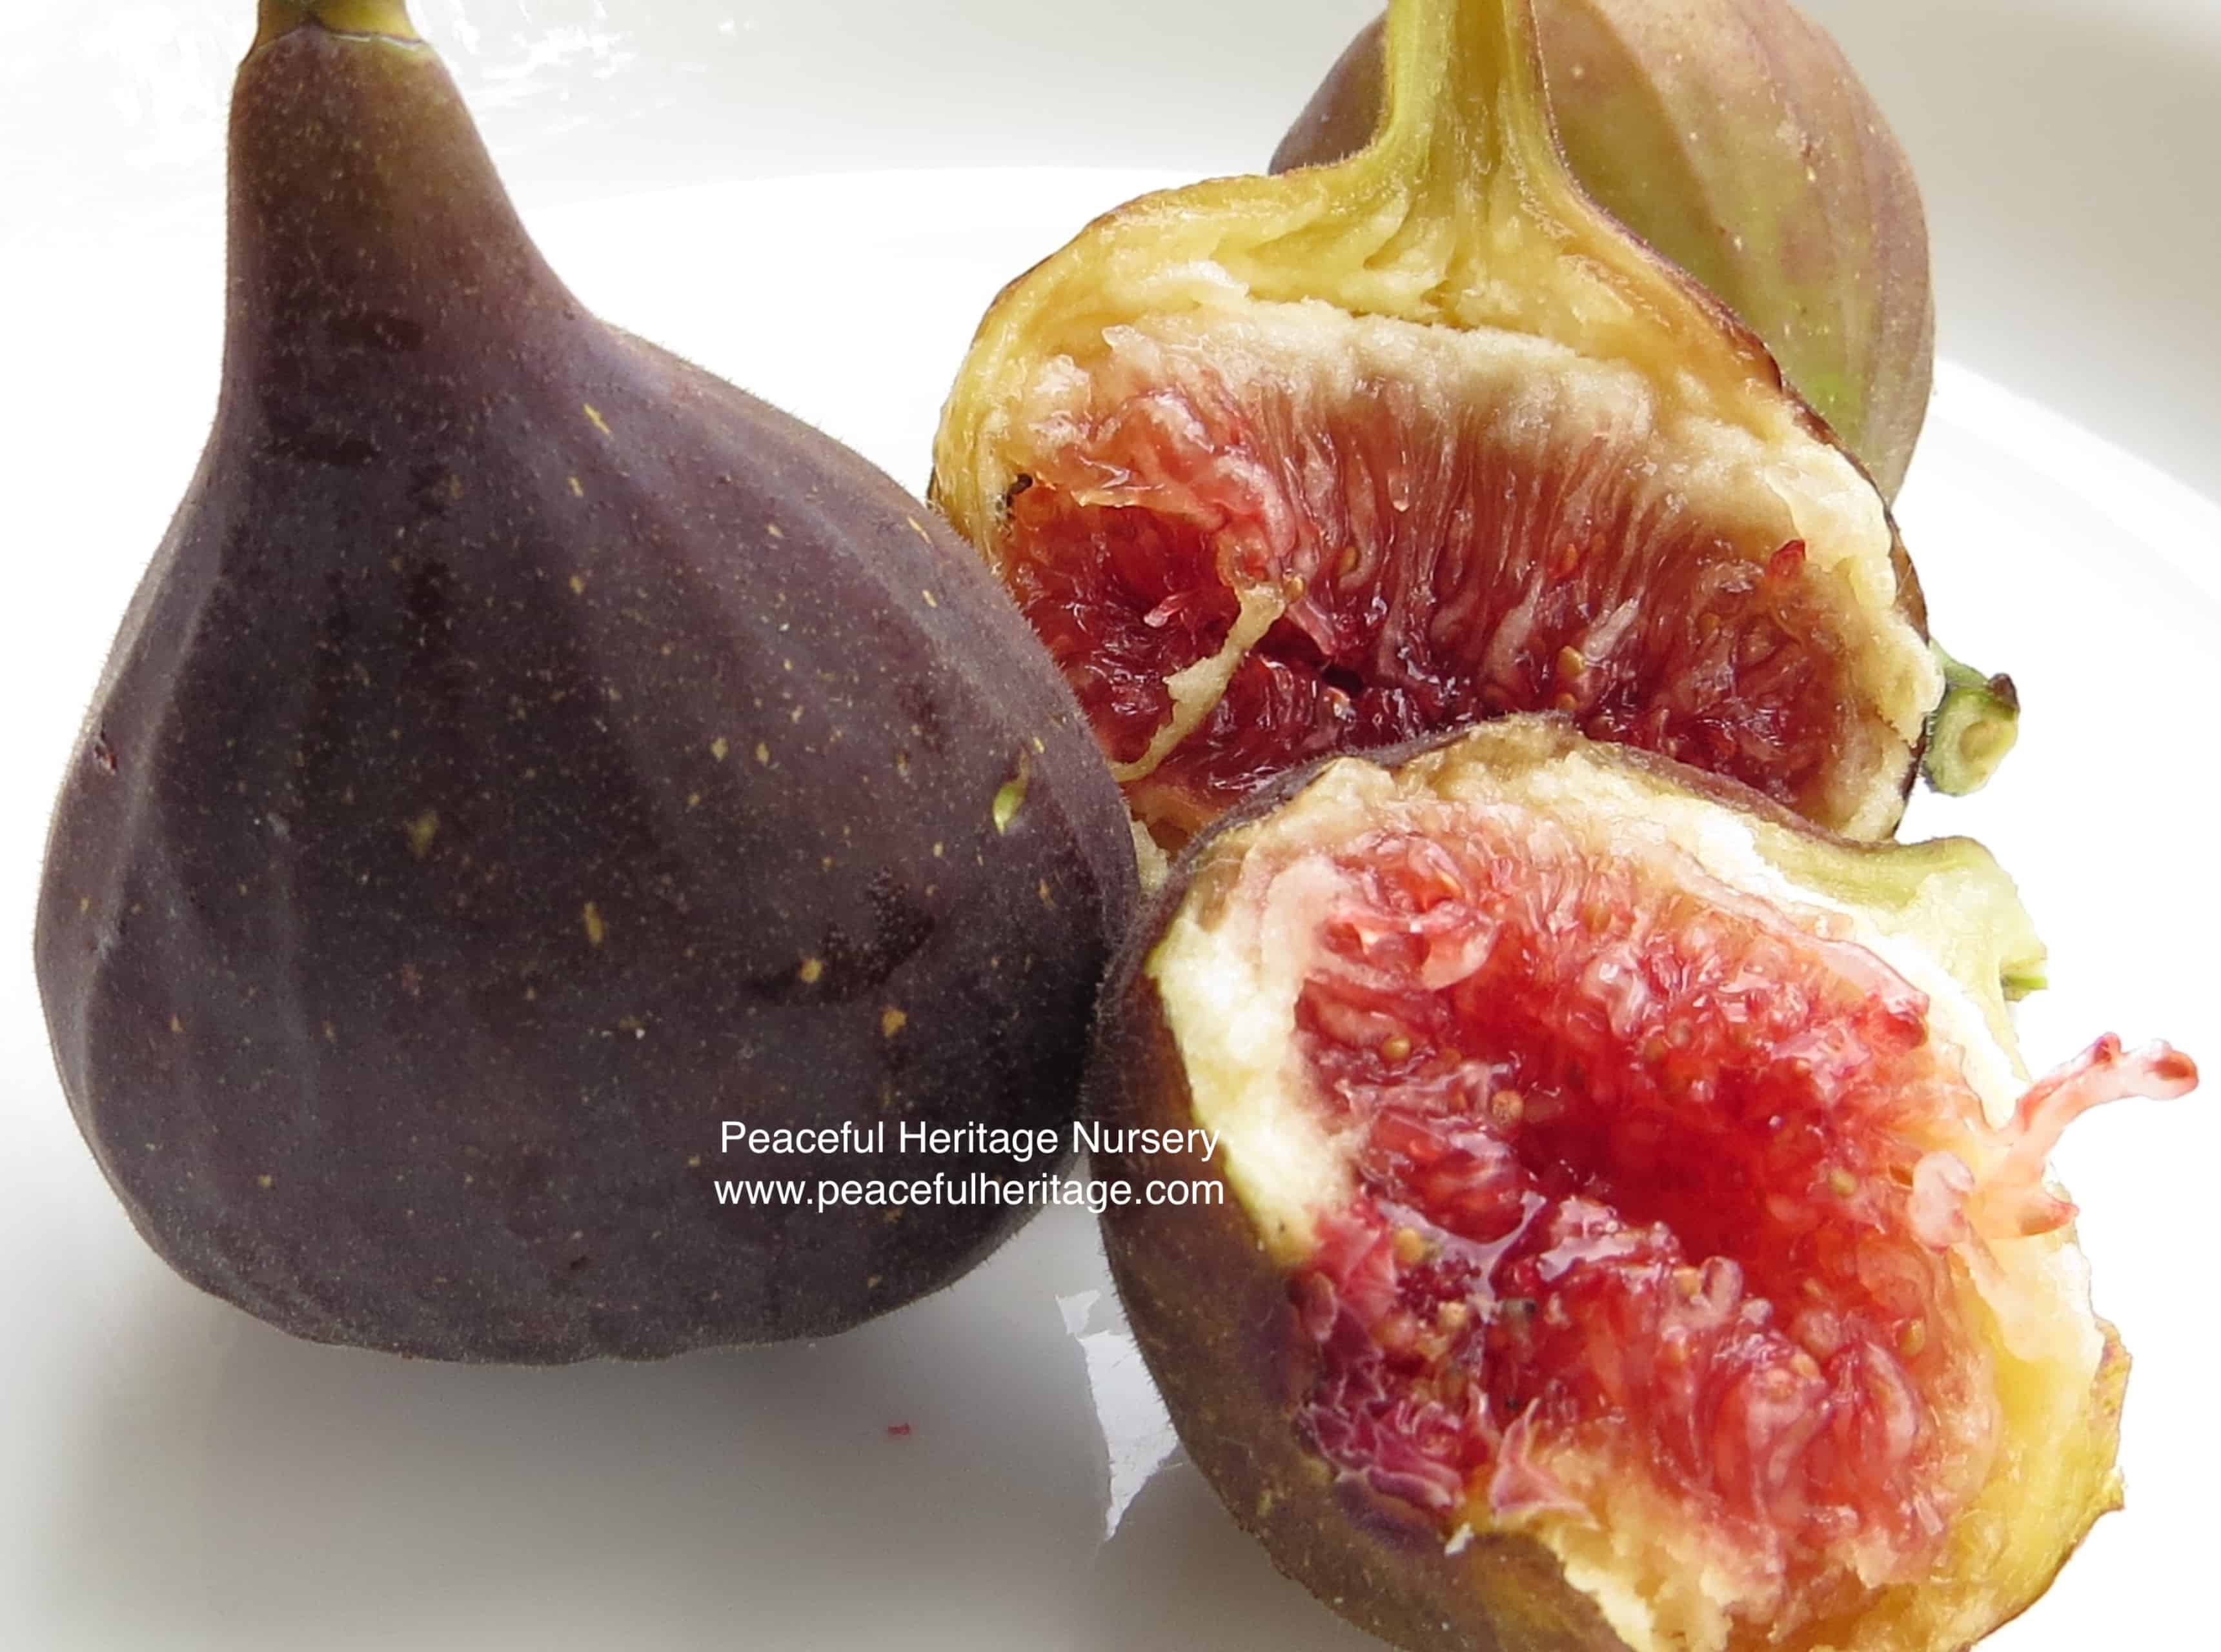 Fig　–　Nursery　Naturally　Heritage　Grown　Peaceful　Chicago　Hardy